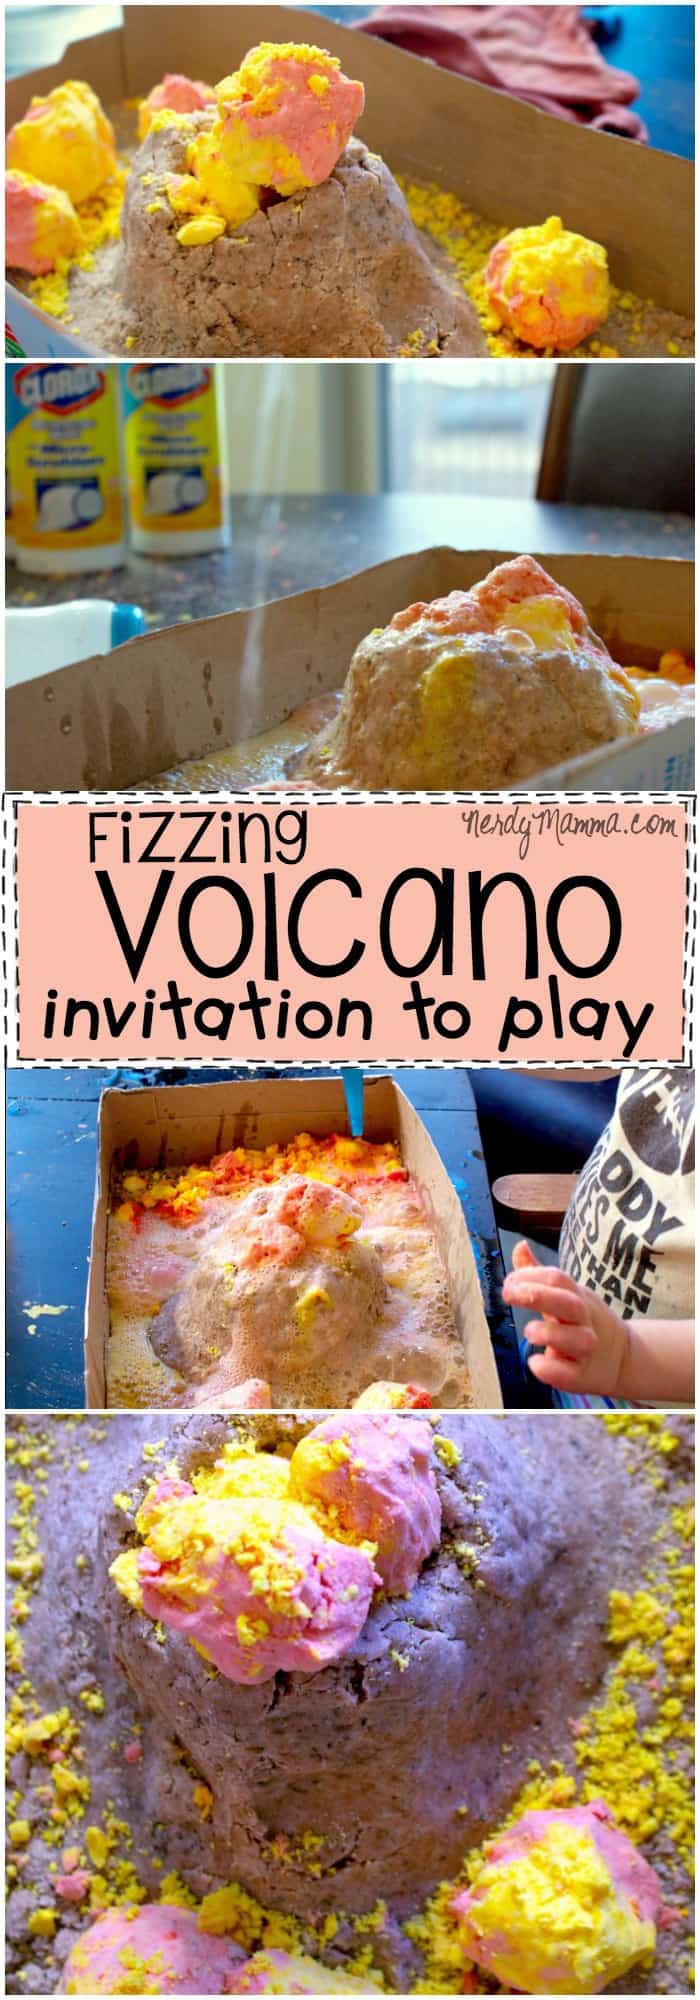 This awesome fizzing volcano invitation to play is so cool. Taste-safe for toddlers, even older kids could get into it. So fun!